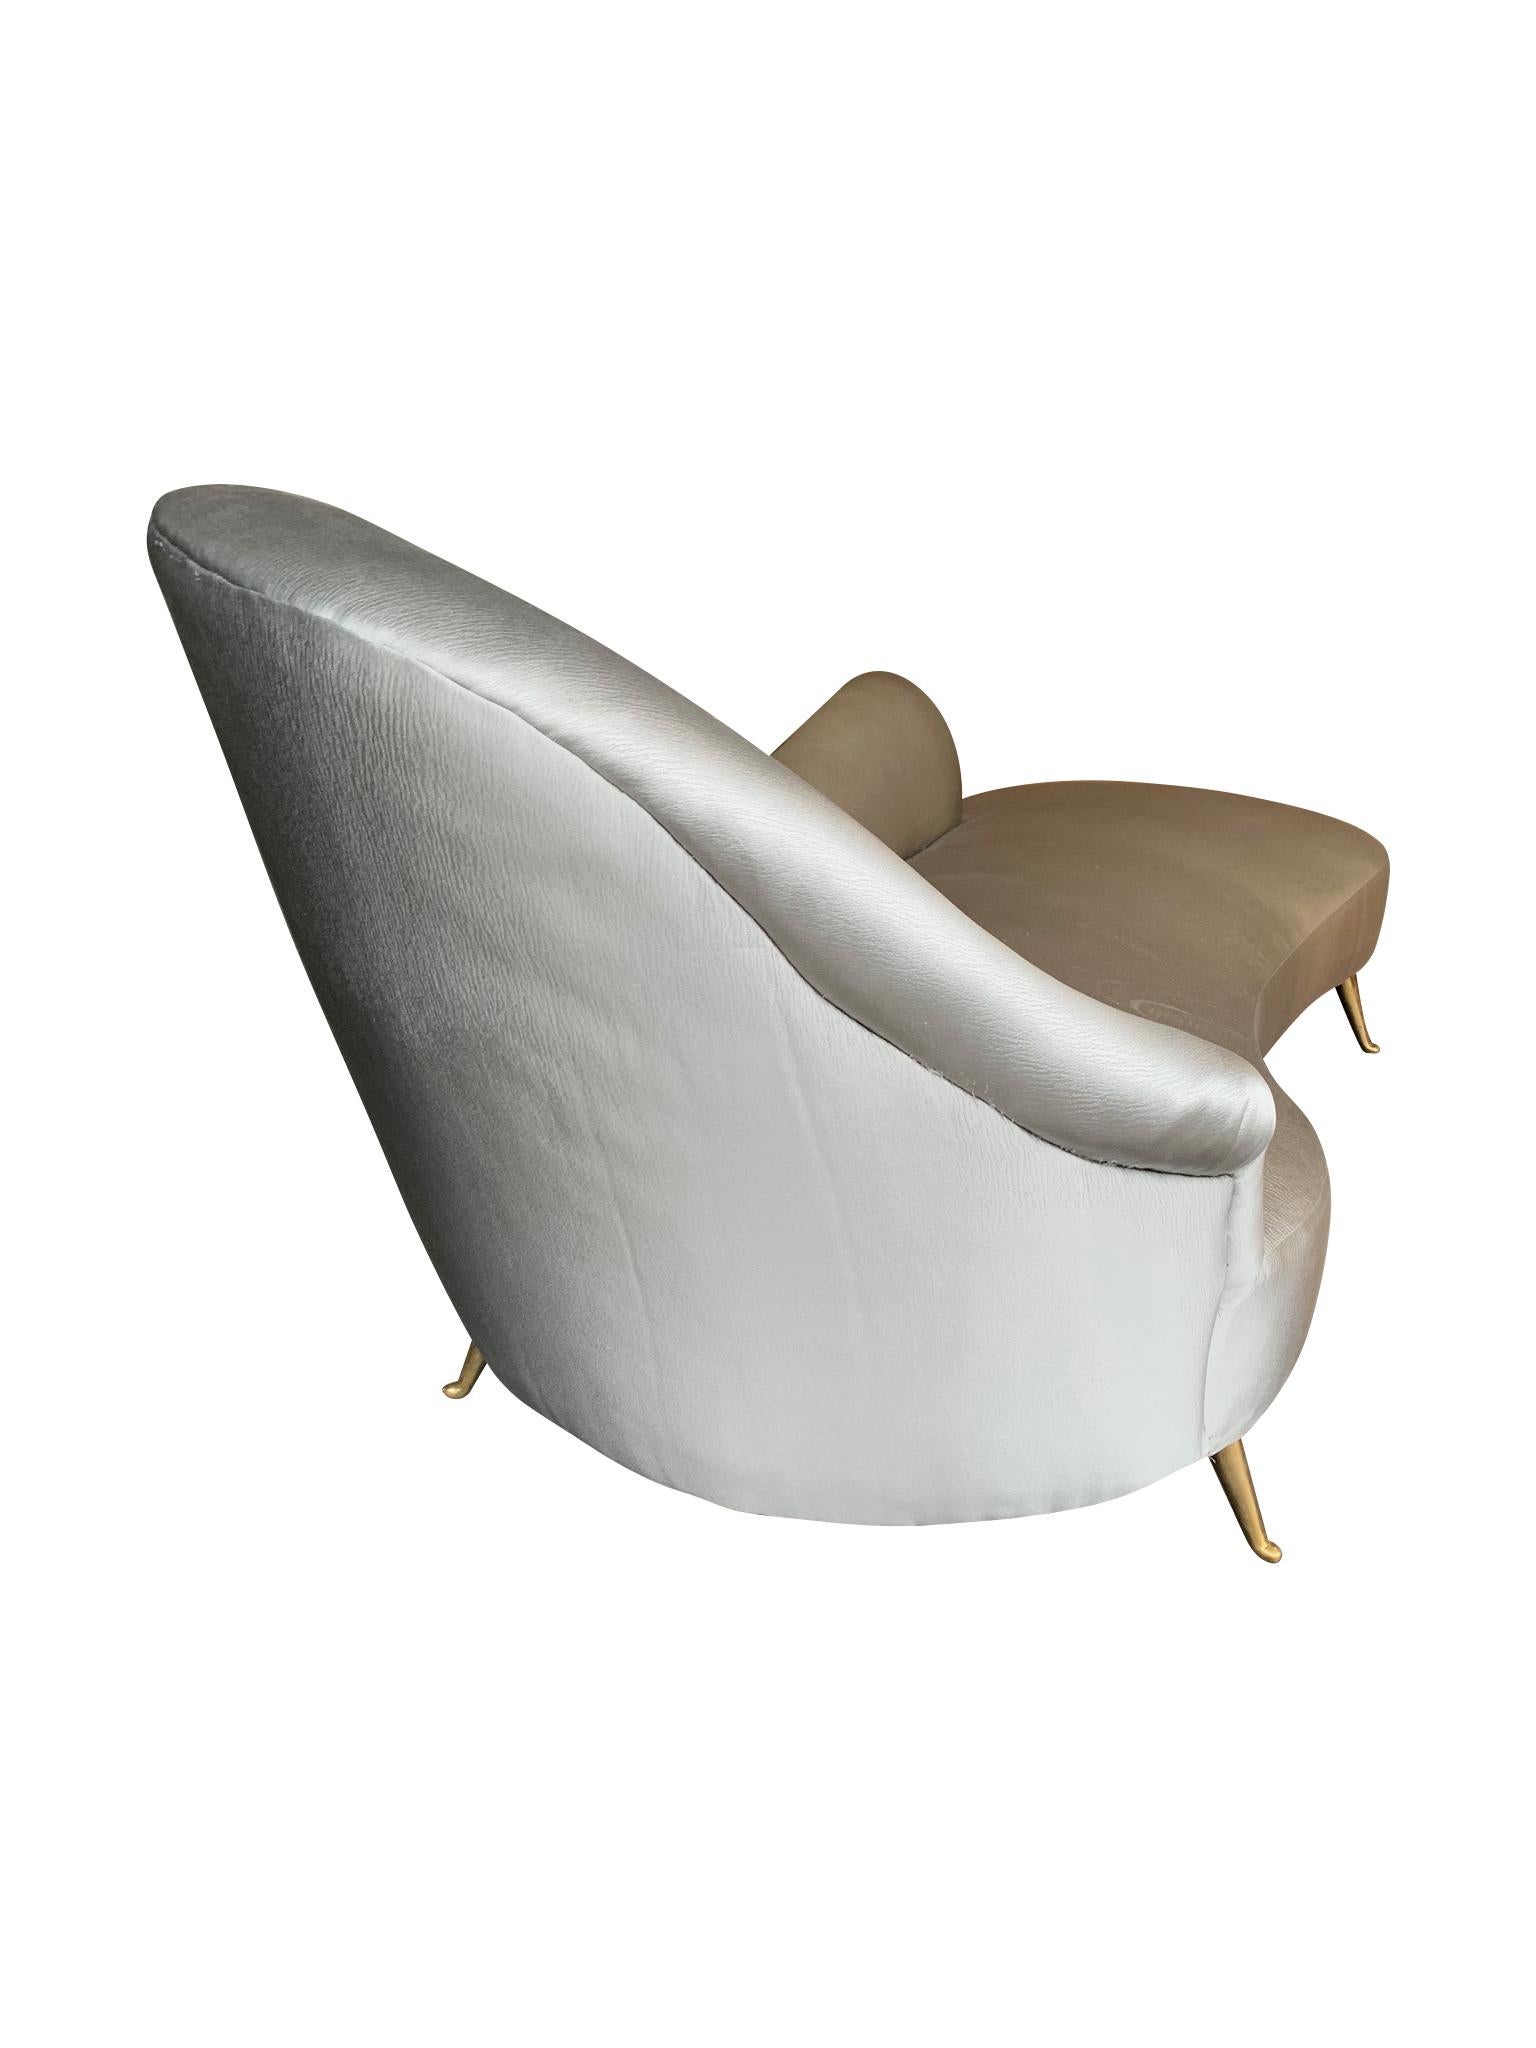 Italian Chaise Longue Upholstered in Silver Grey Fabric with Brass Feet 3